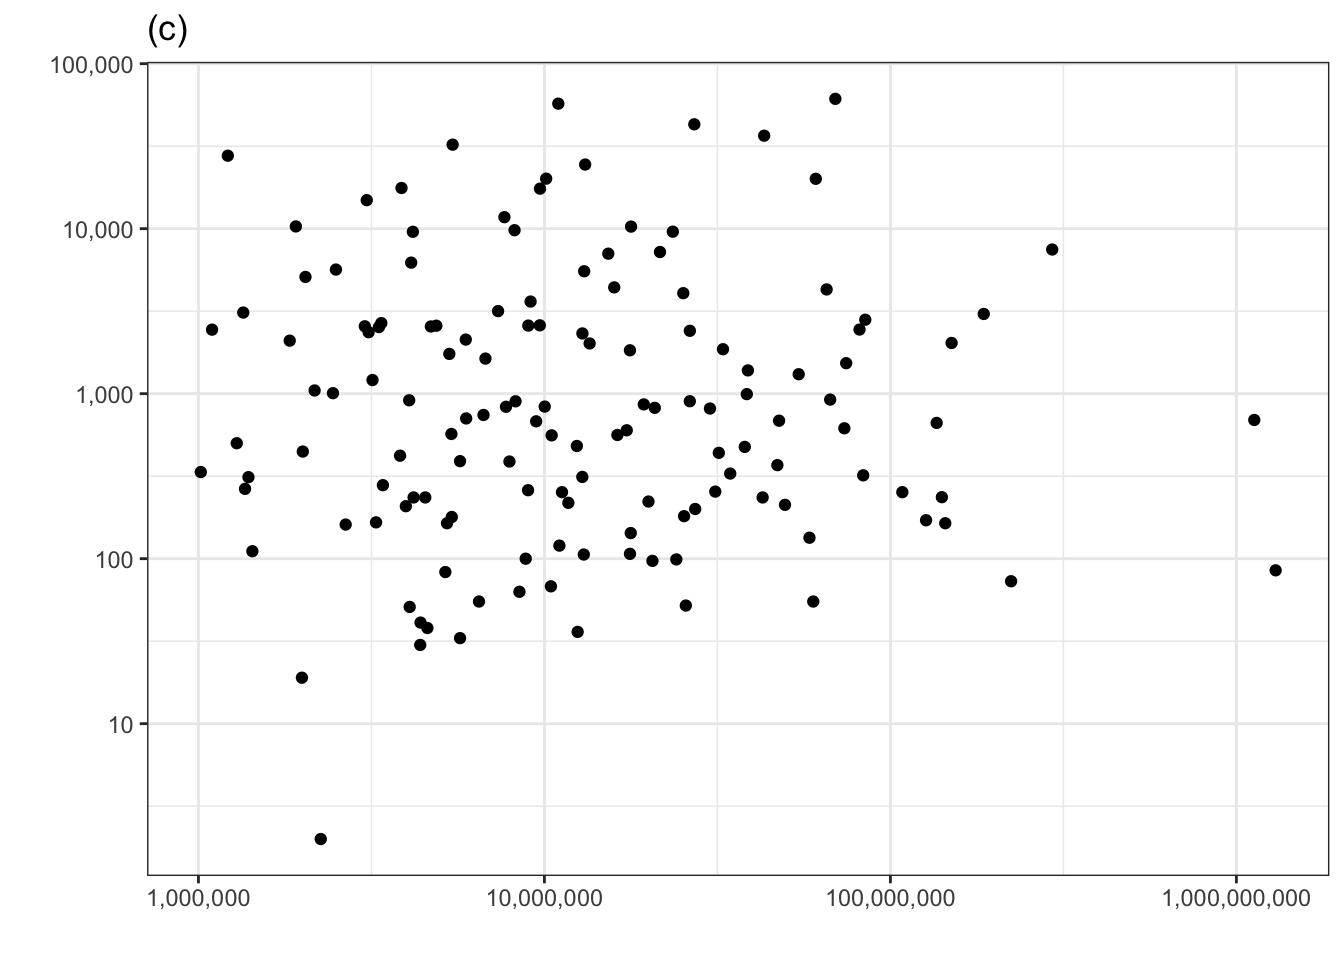 Checking for covariation in the number of murders versus population using the permutation method.